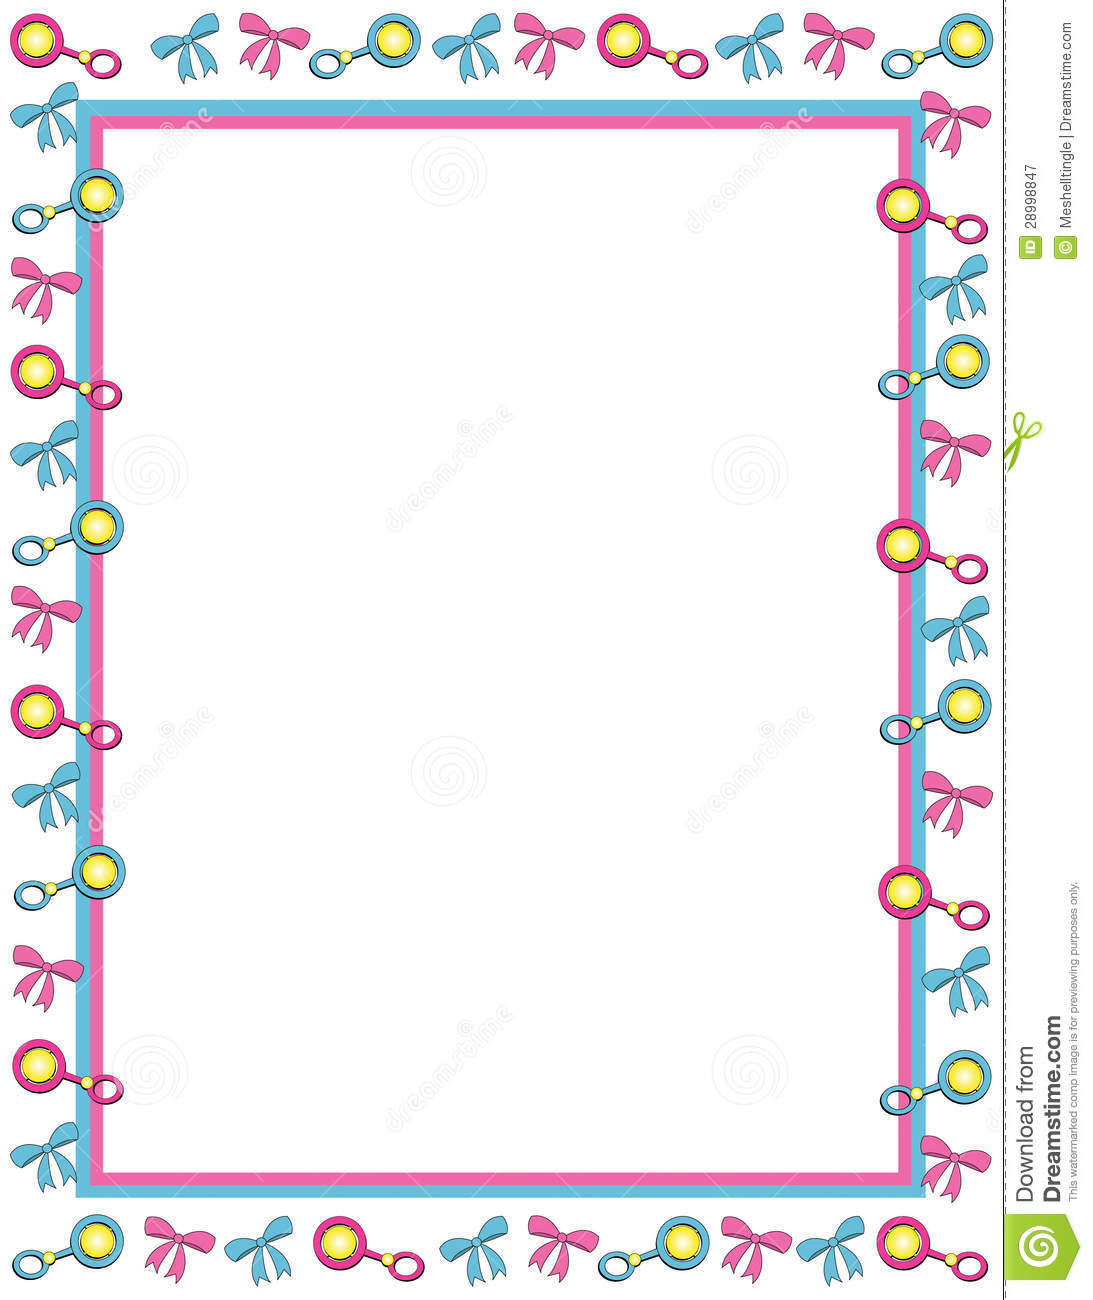 Free Baby Borders Clip Art Frames And Borders For Babies Cartoon Frame